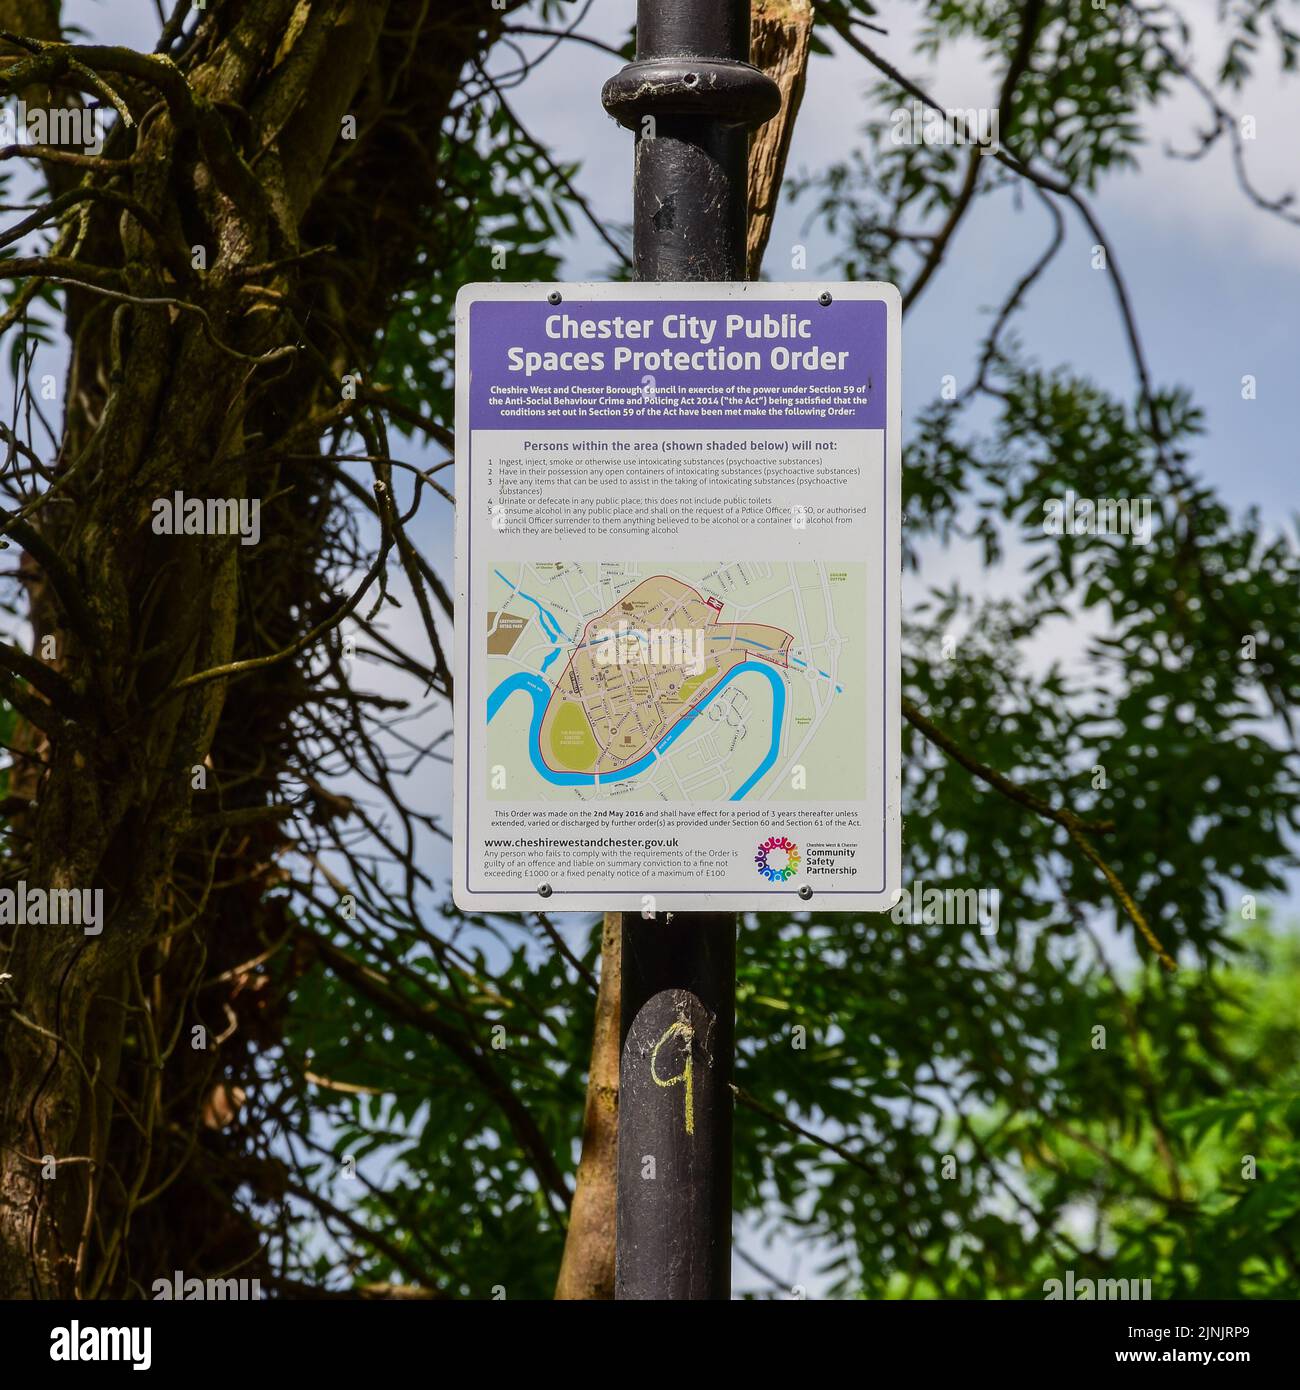 Chester, UK: Jul 3, 2022: A sign displayed on the City Walls Road contains information about the Chester city centre spaces protection order along wit Stock Photo